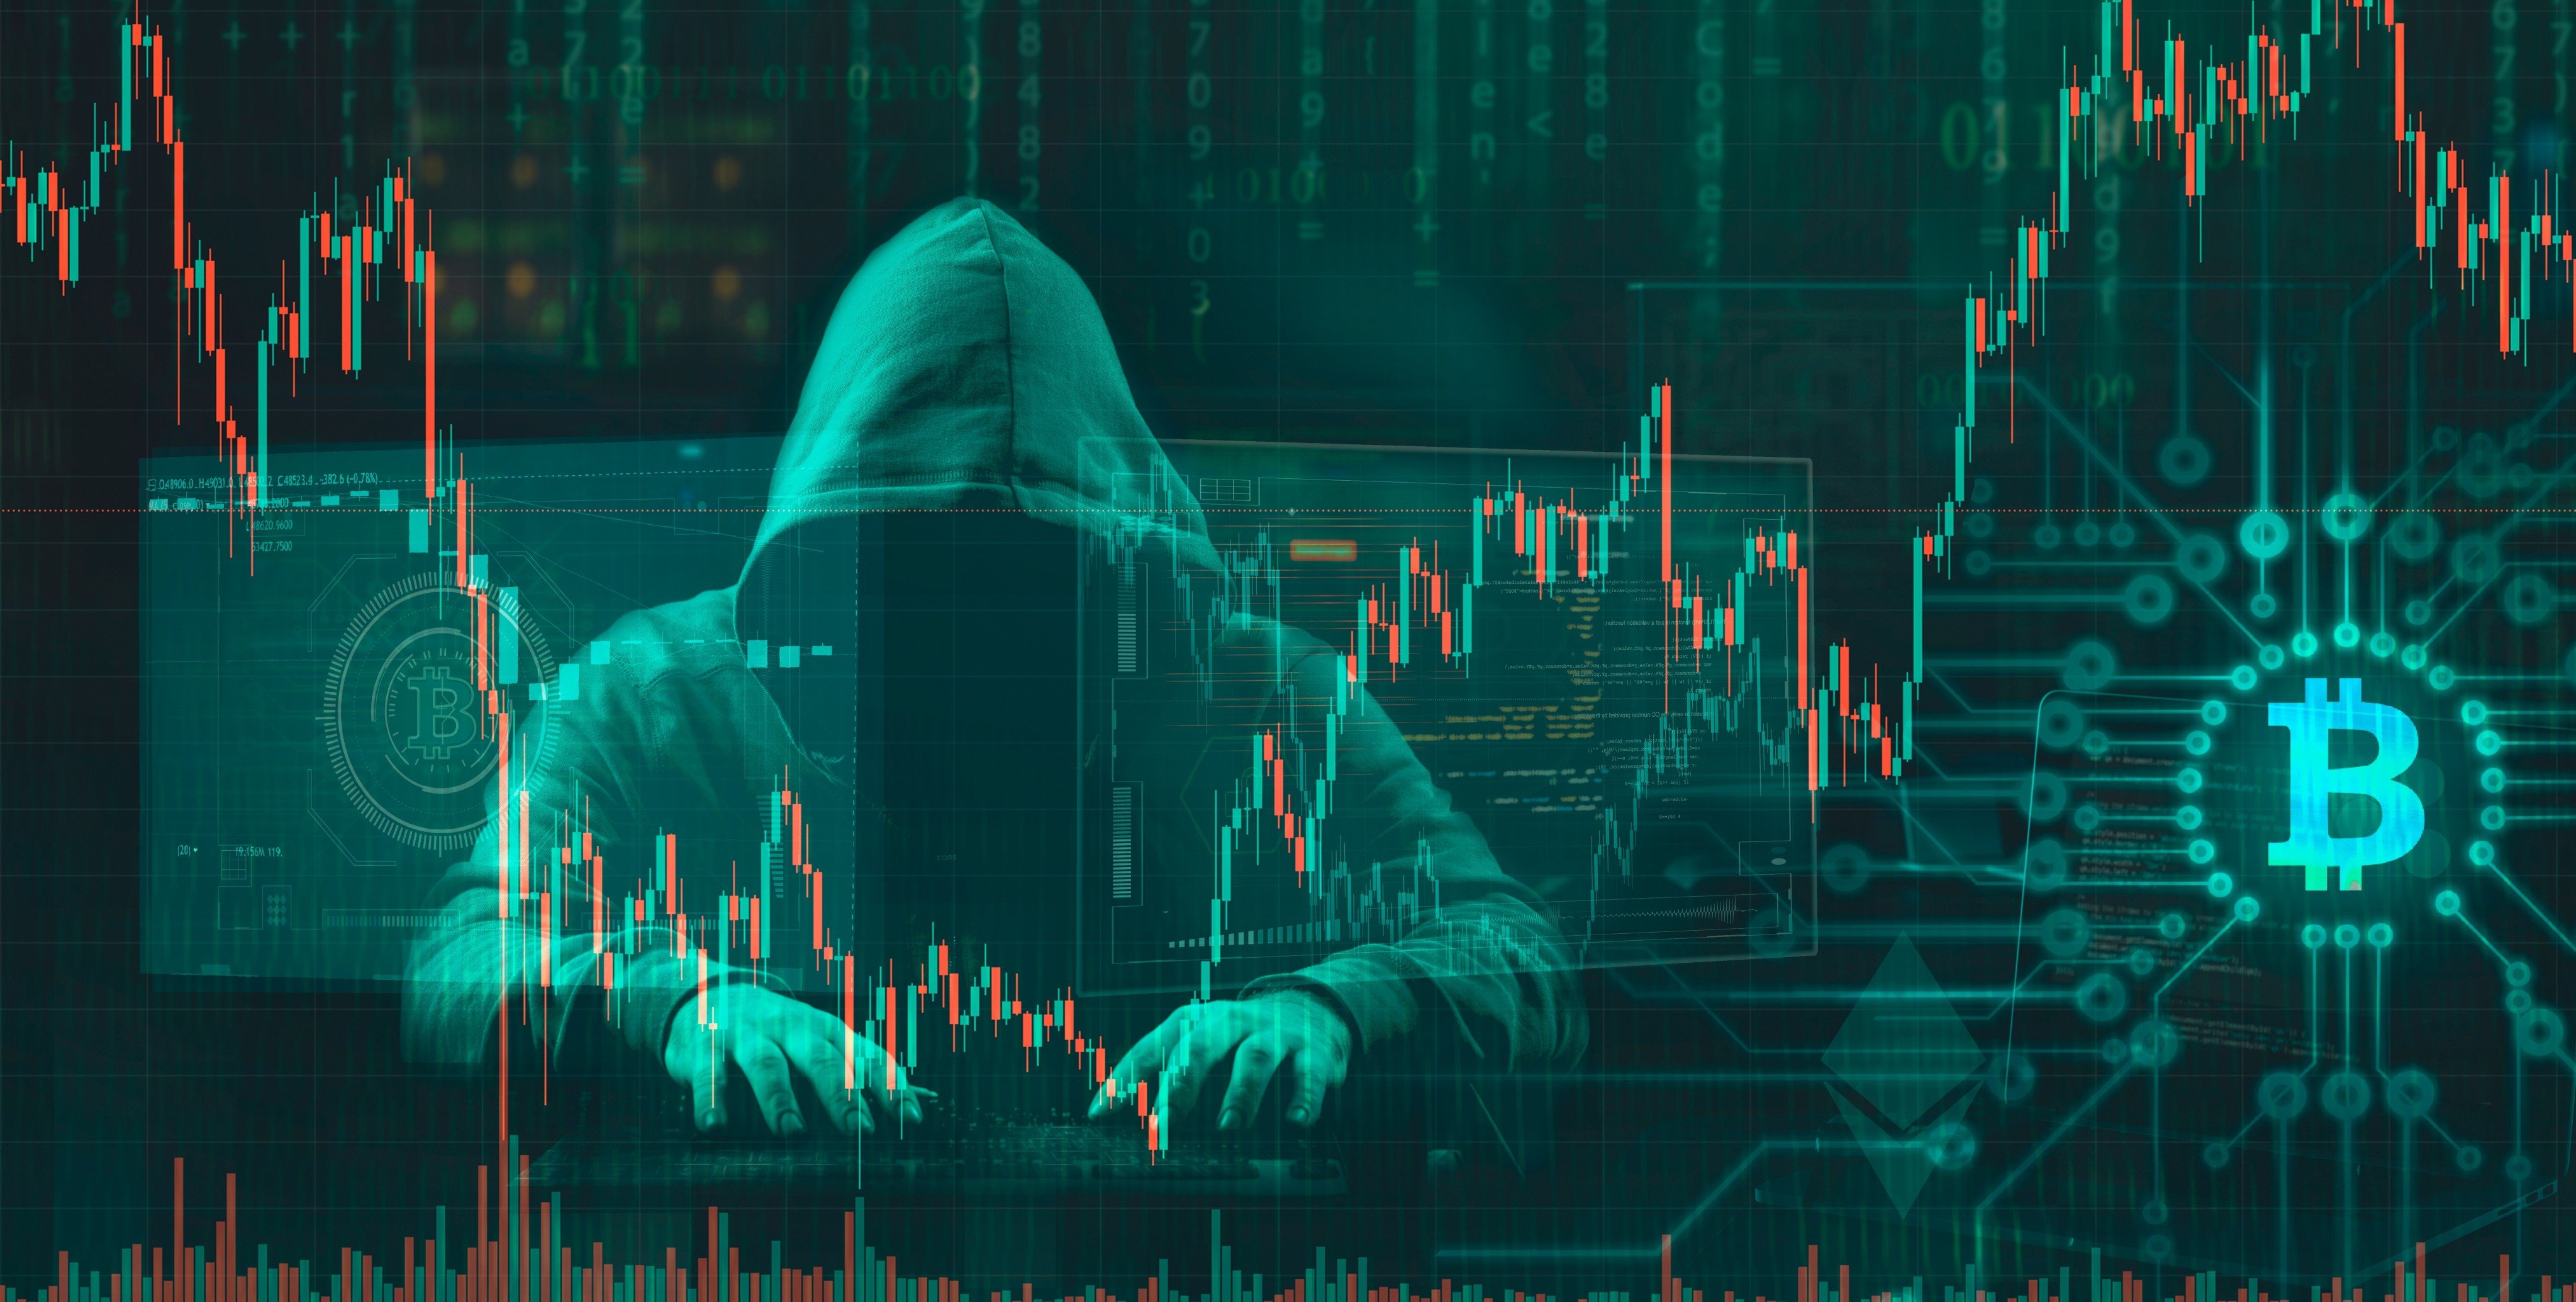 Minimal regulation of digital currencies have made them the scammers’ avenue of choice for moving high volumes of illicit revenue. Photo: Shutterstock